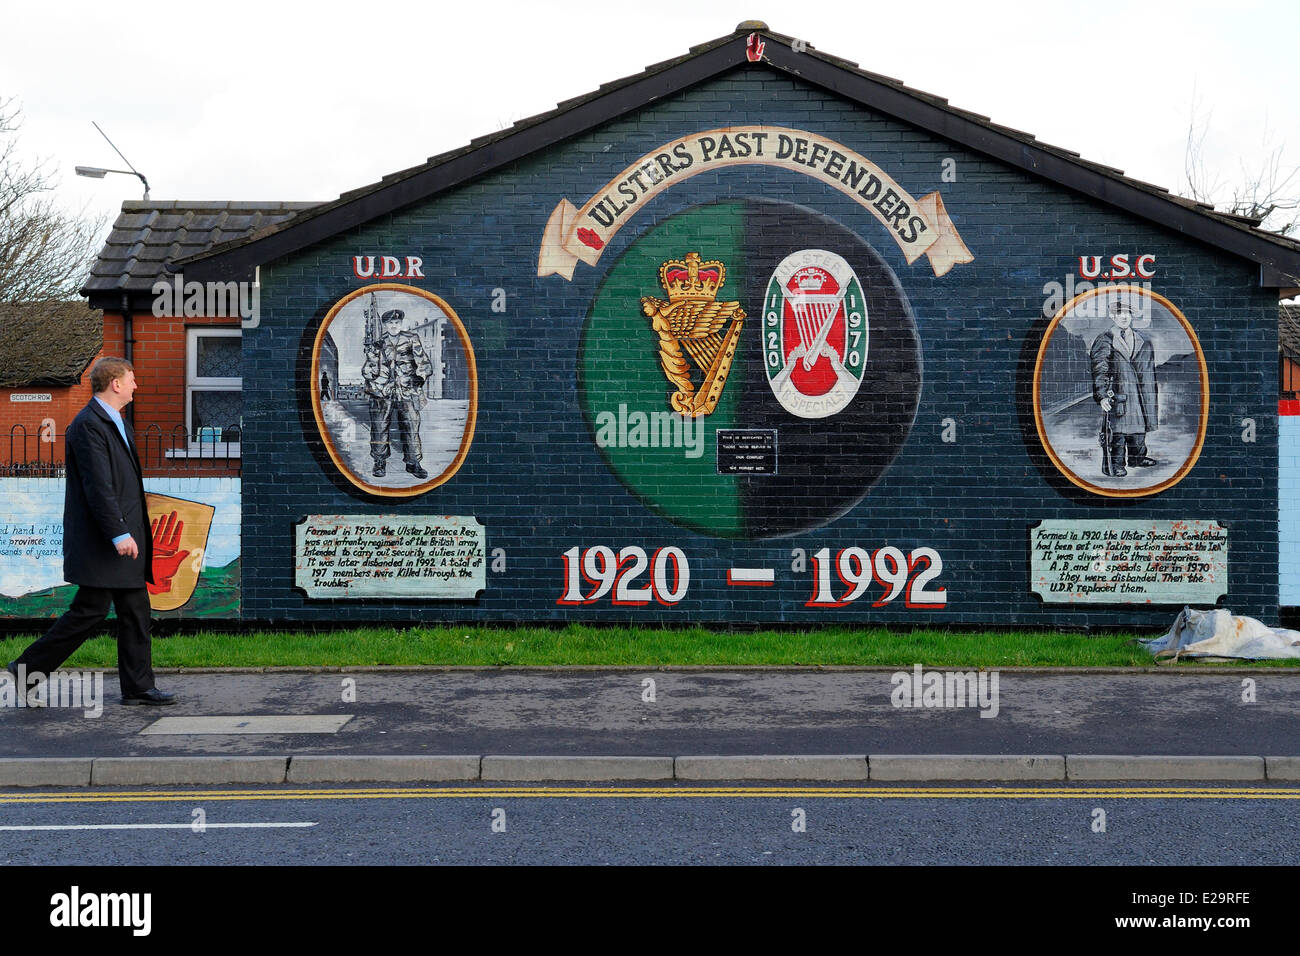 United Kingdom, Northern Ireland, East Belfast, protestant loyalist districts of Newtownards road, political wall paintings to Stock Photo